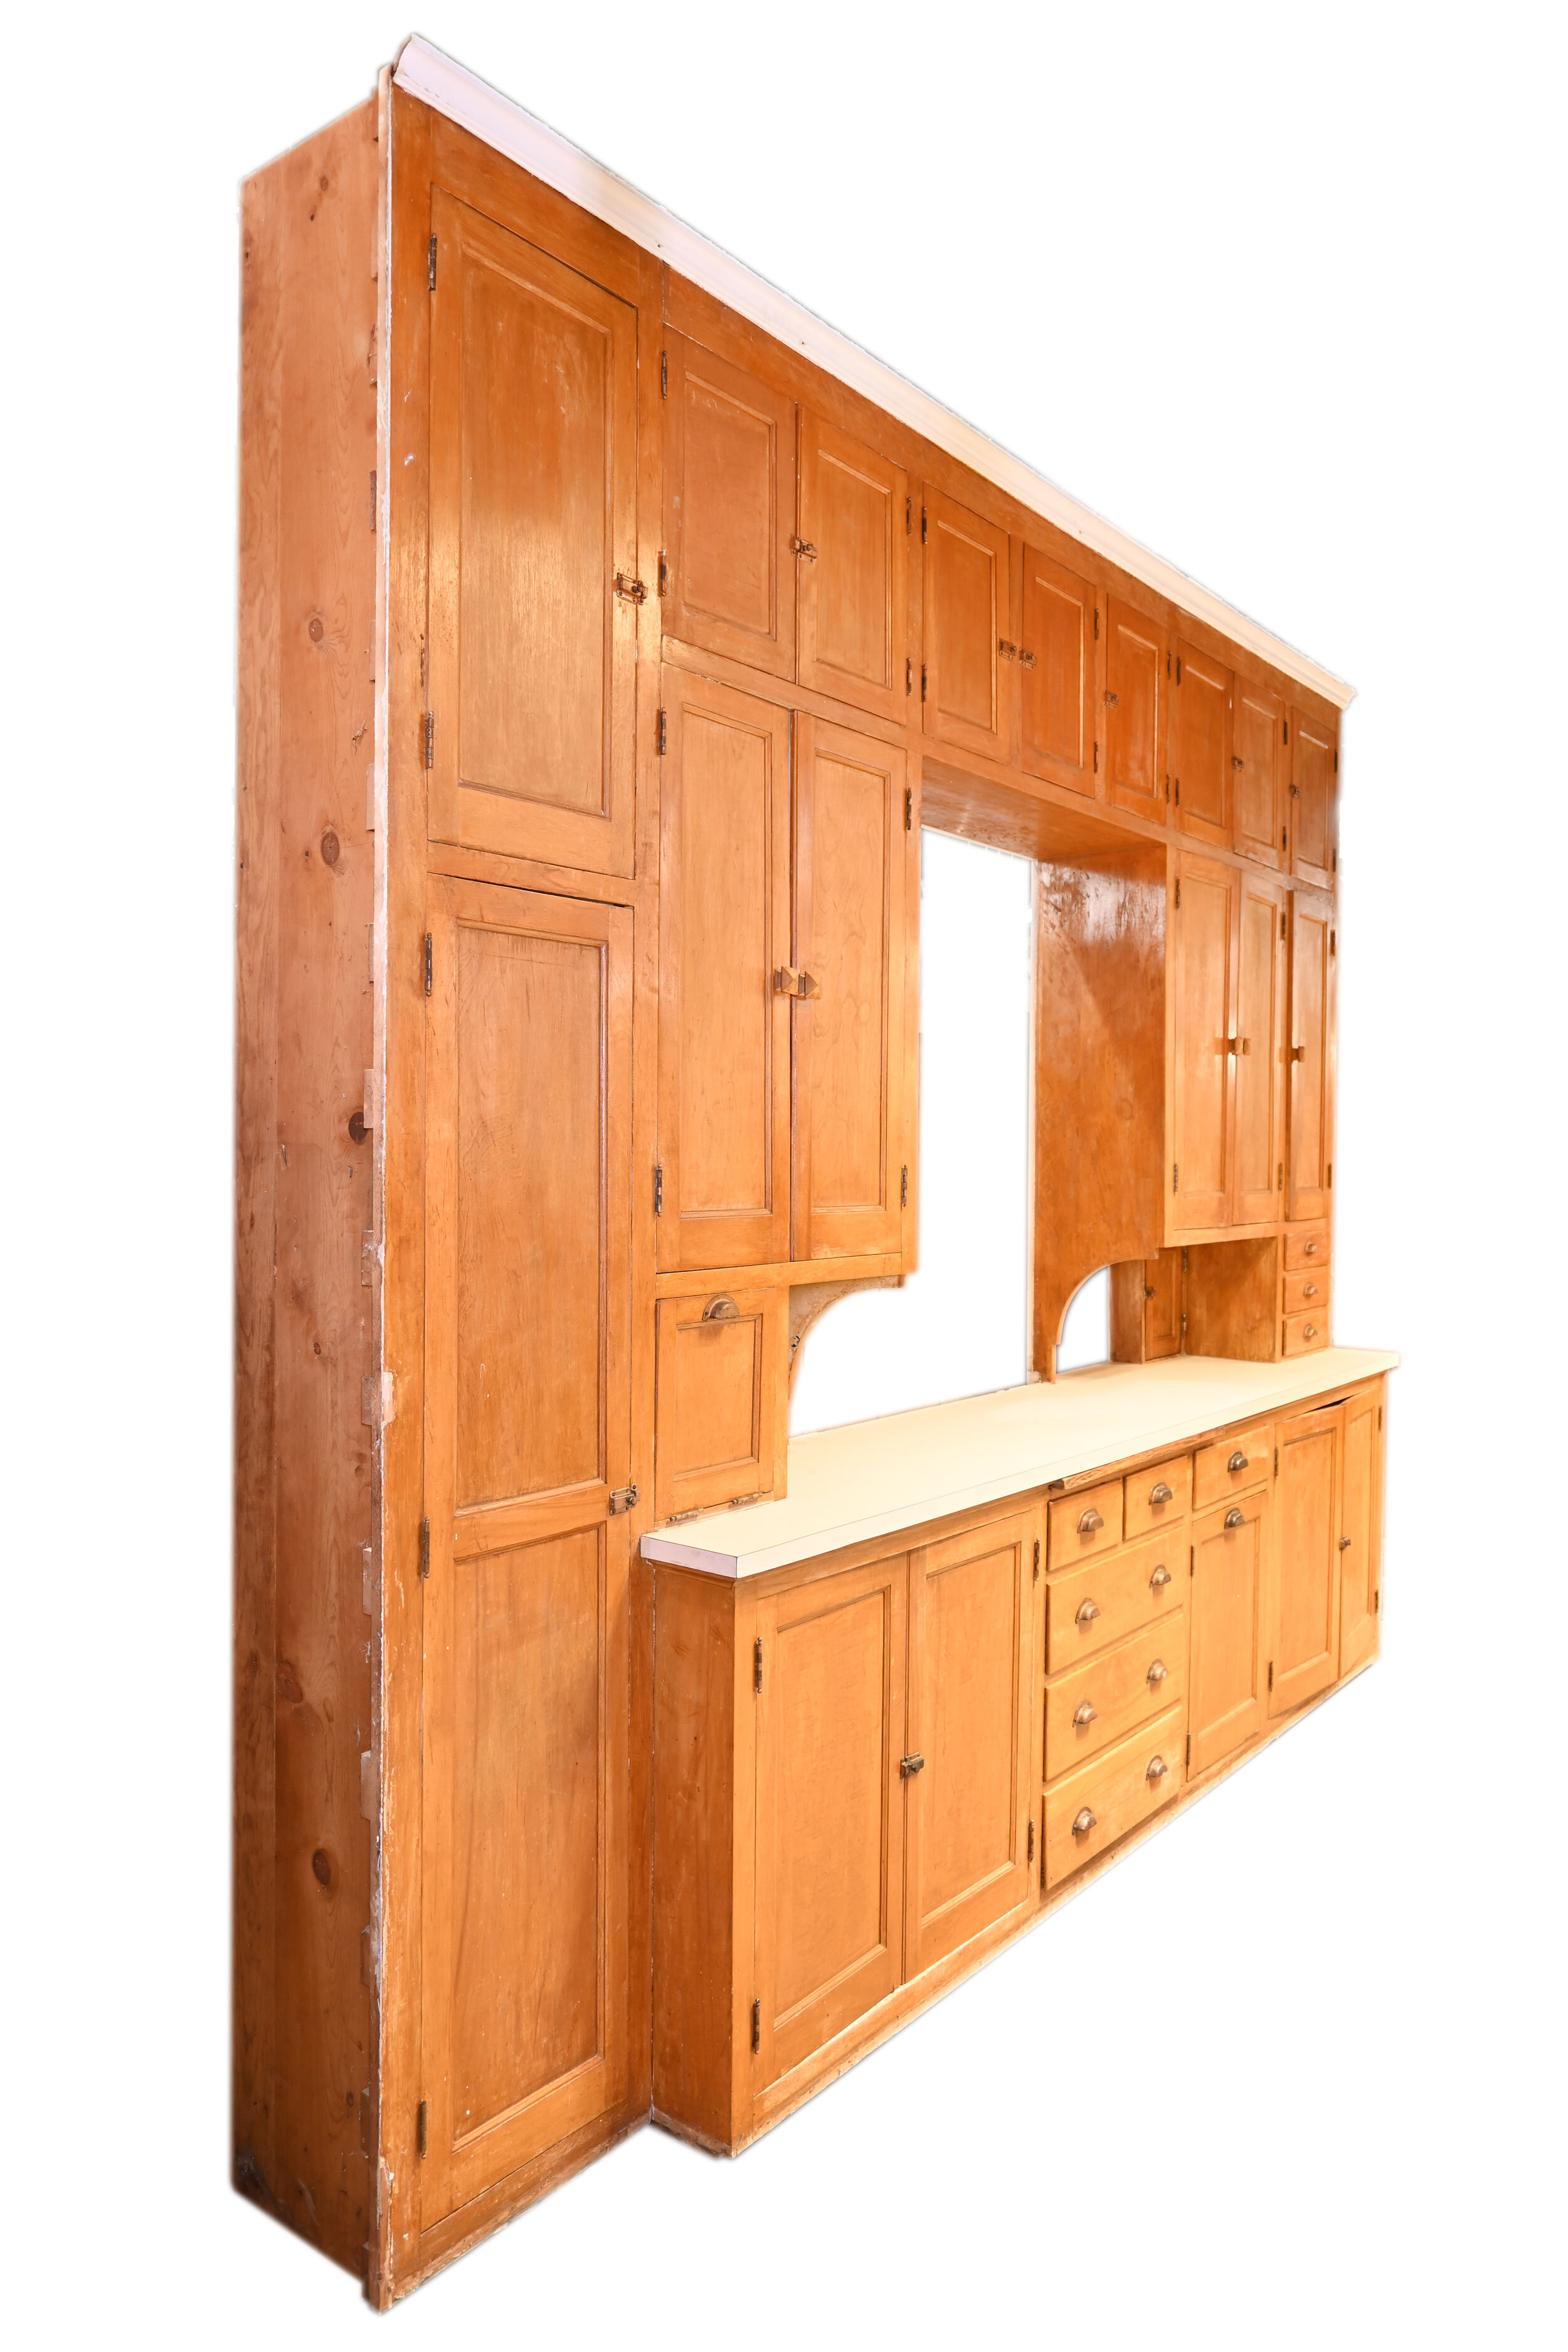 birch kitchen cabinet unit with tall broom closet — ARCHITECTURAL ANTIQUES